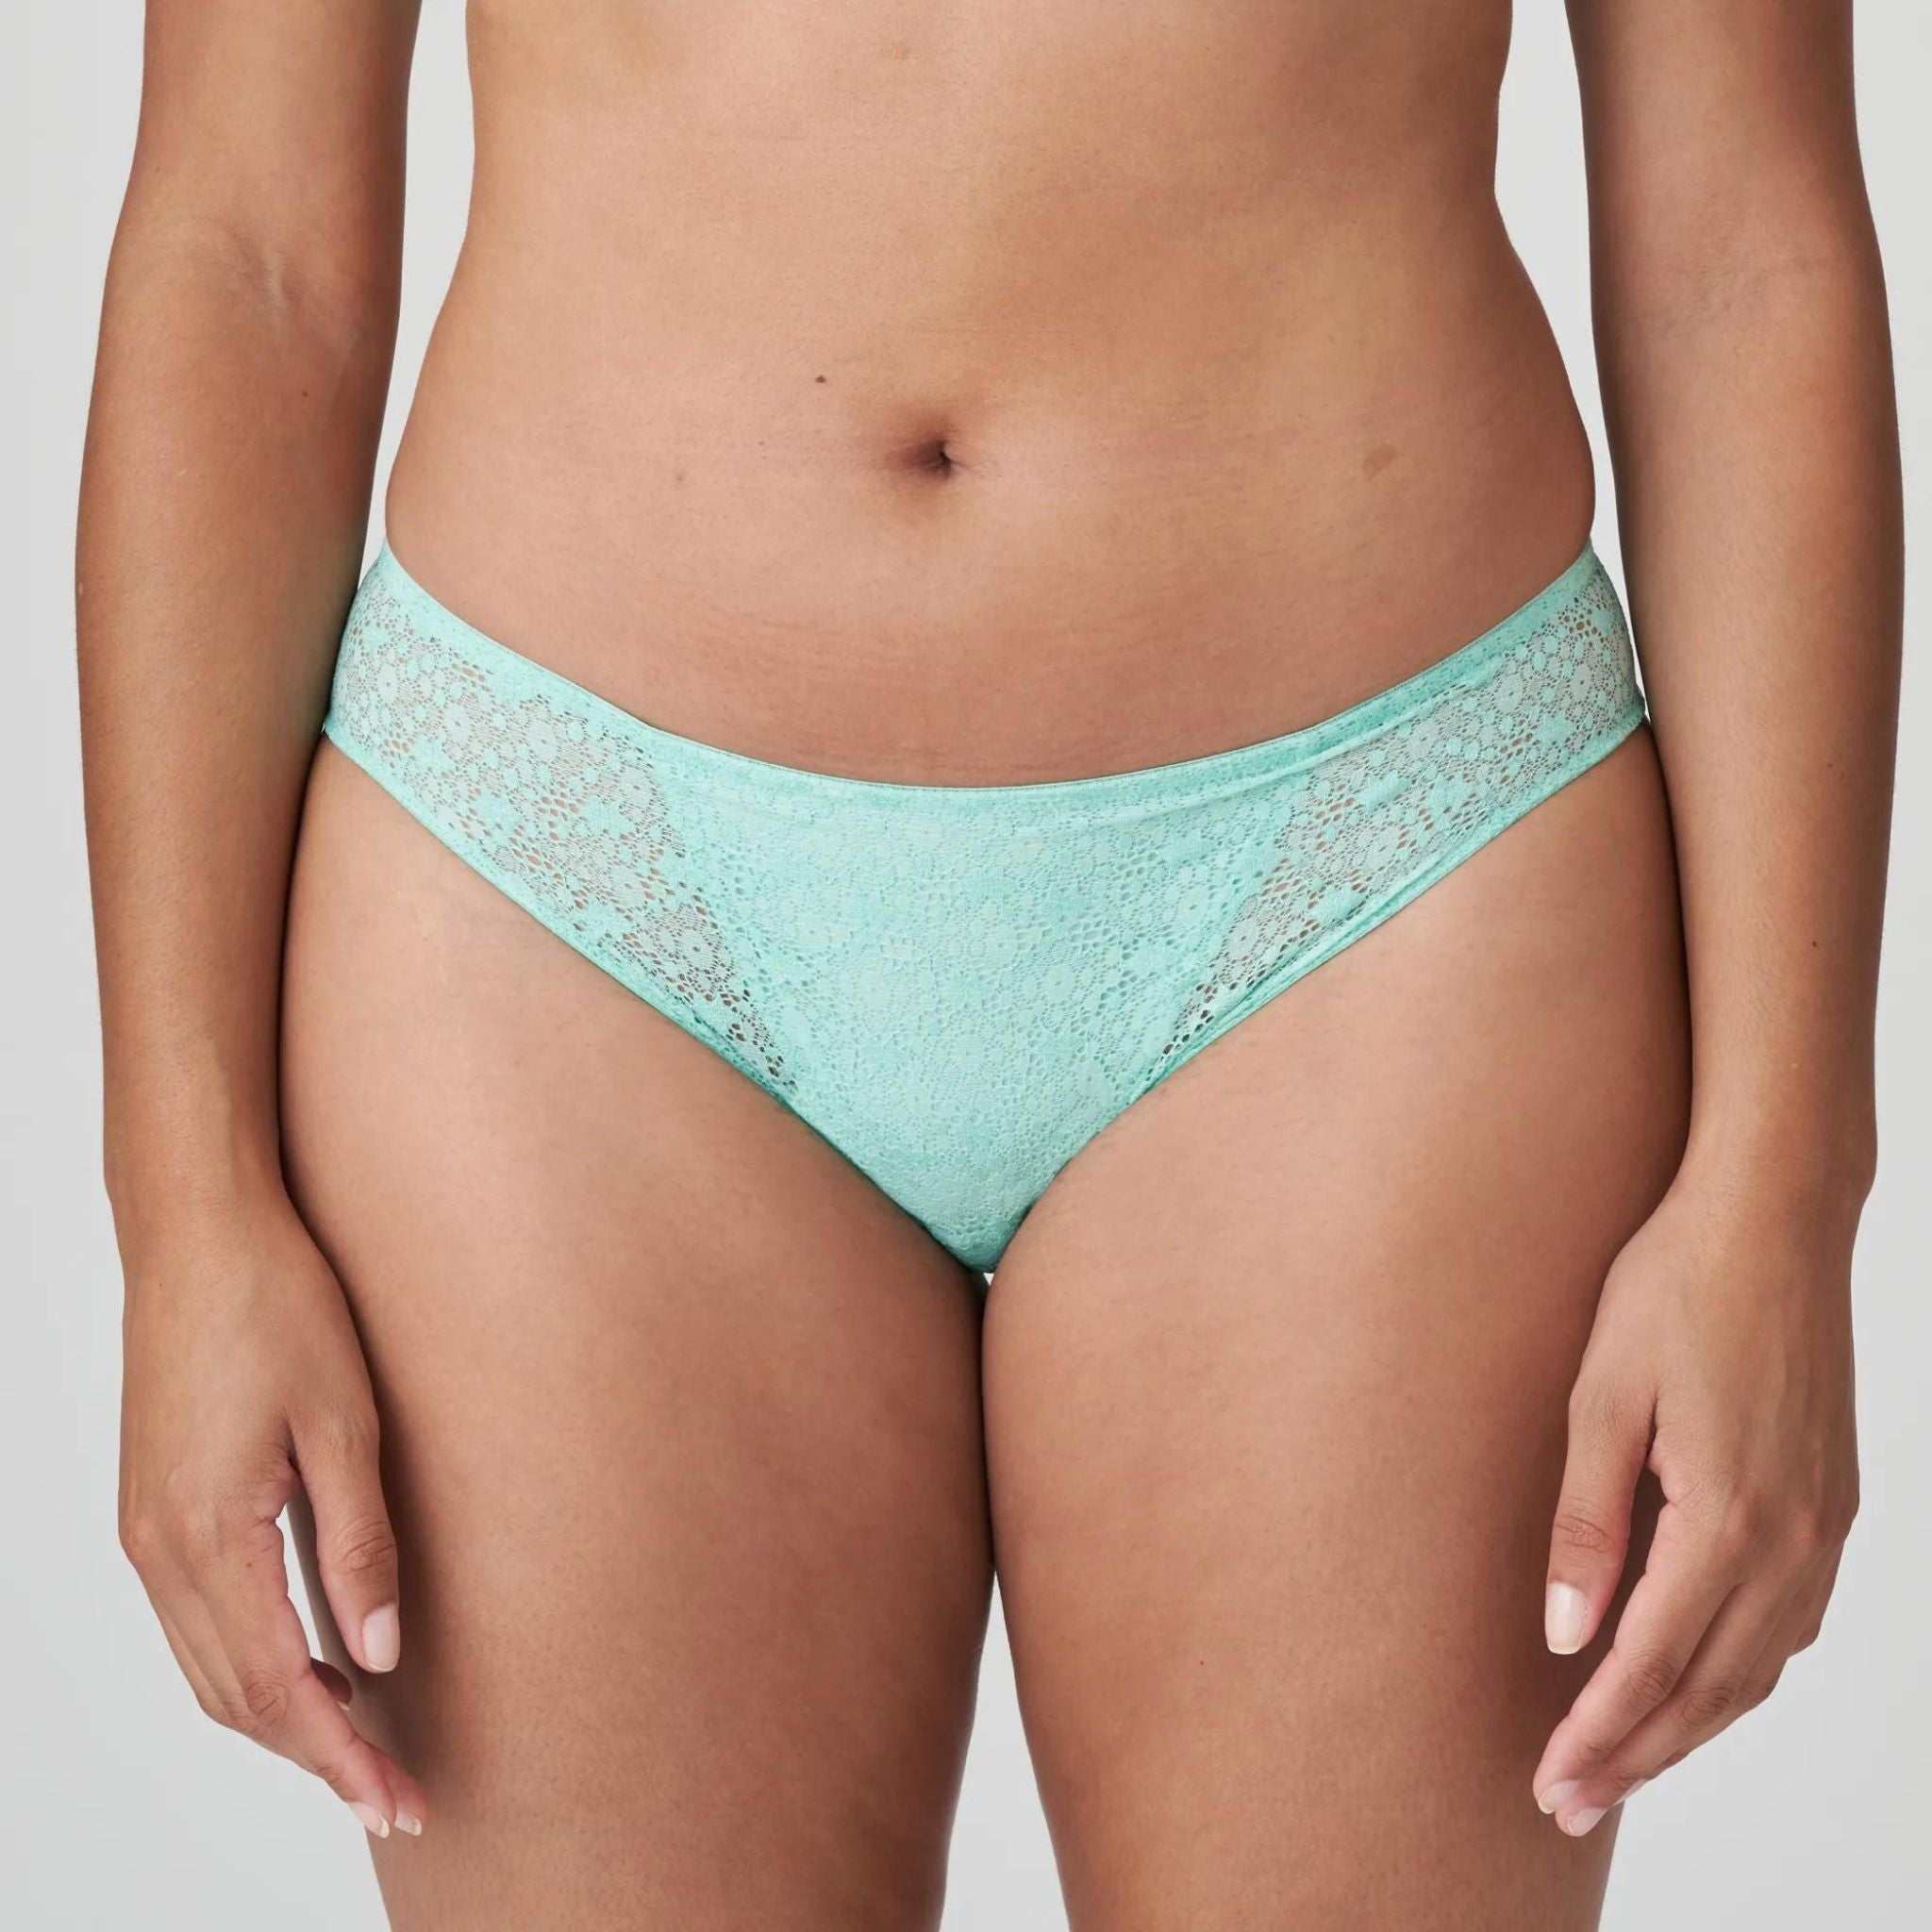 Rio briefs featuring vintage lace and satin-look fabric in a solid color at the back. Feminine eyelash lace on the back adds the finishing touch to this 70s look. Miami Mint is a mint green color with a Californian retro vibe – fresh and summery against your skin!